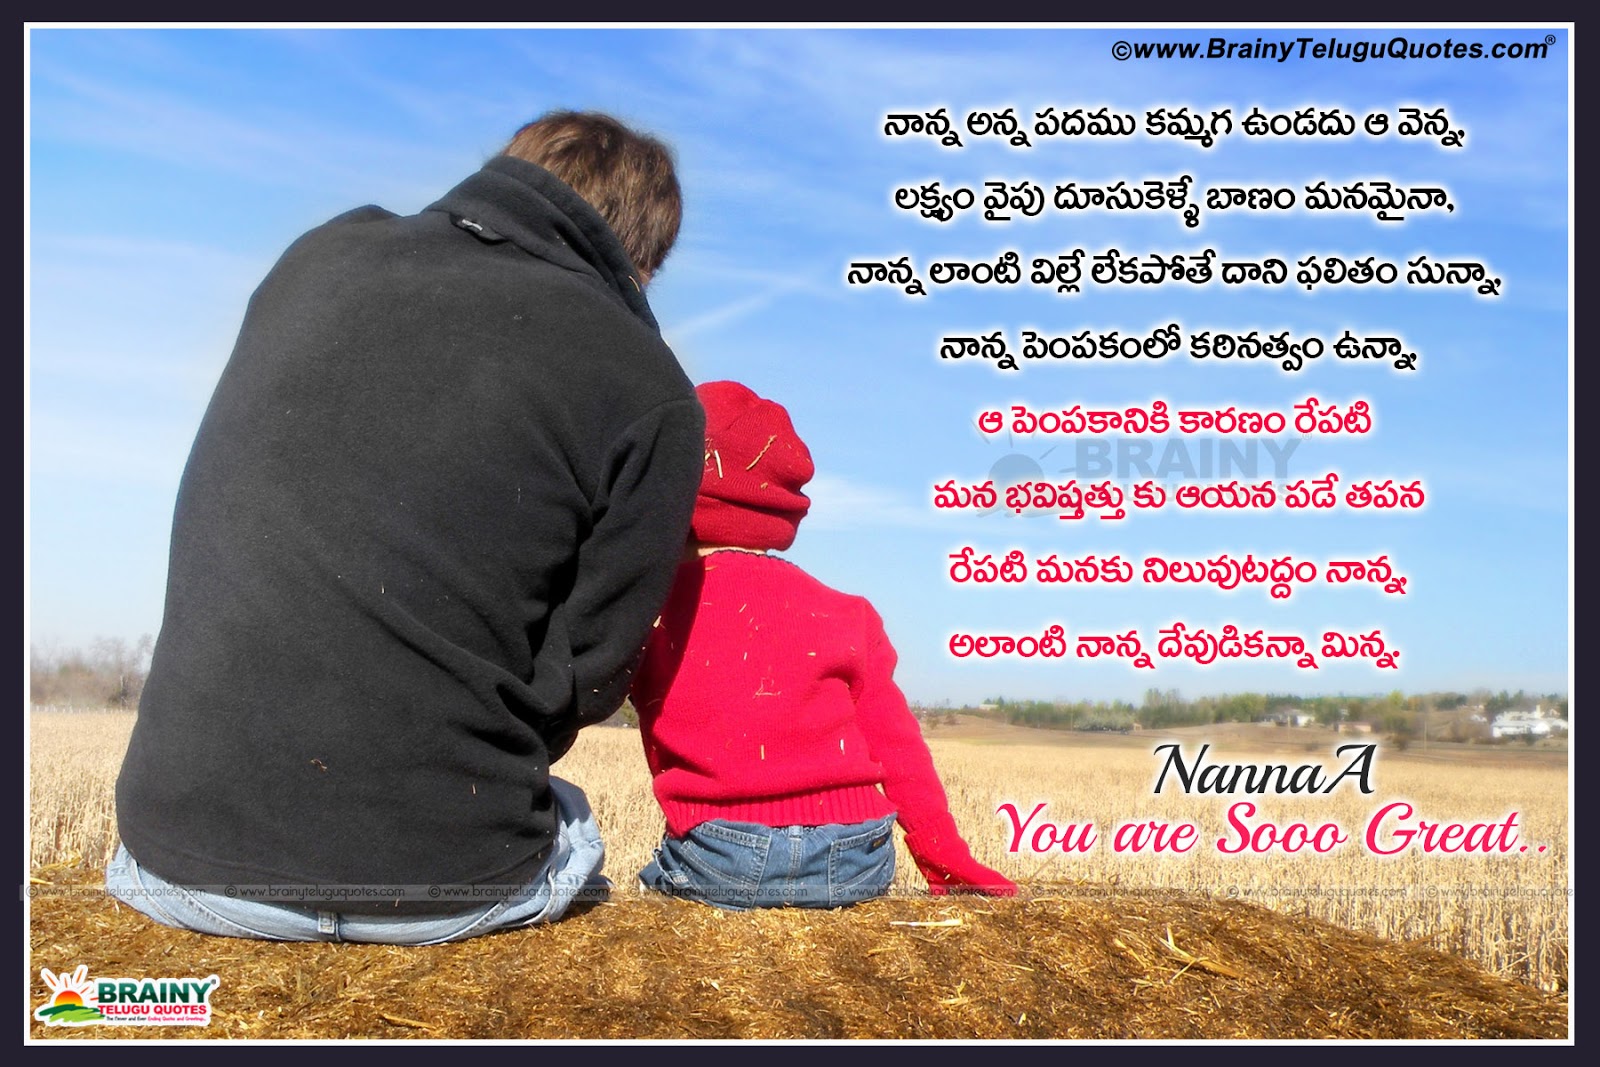 Father And Son Inspirational Quotes Brainyteluguquotes Comtelugu Quotes English Quotes Hindi Quotes Tamil Quotes Greetings